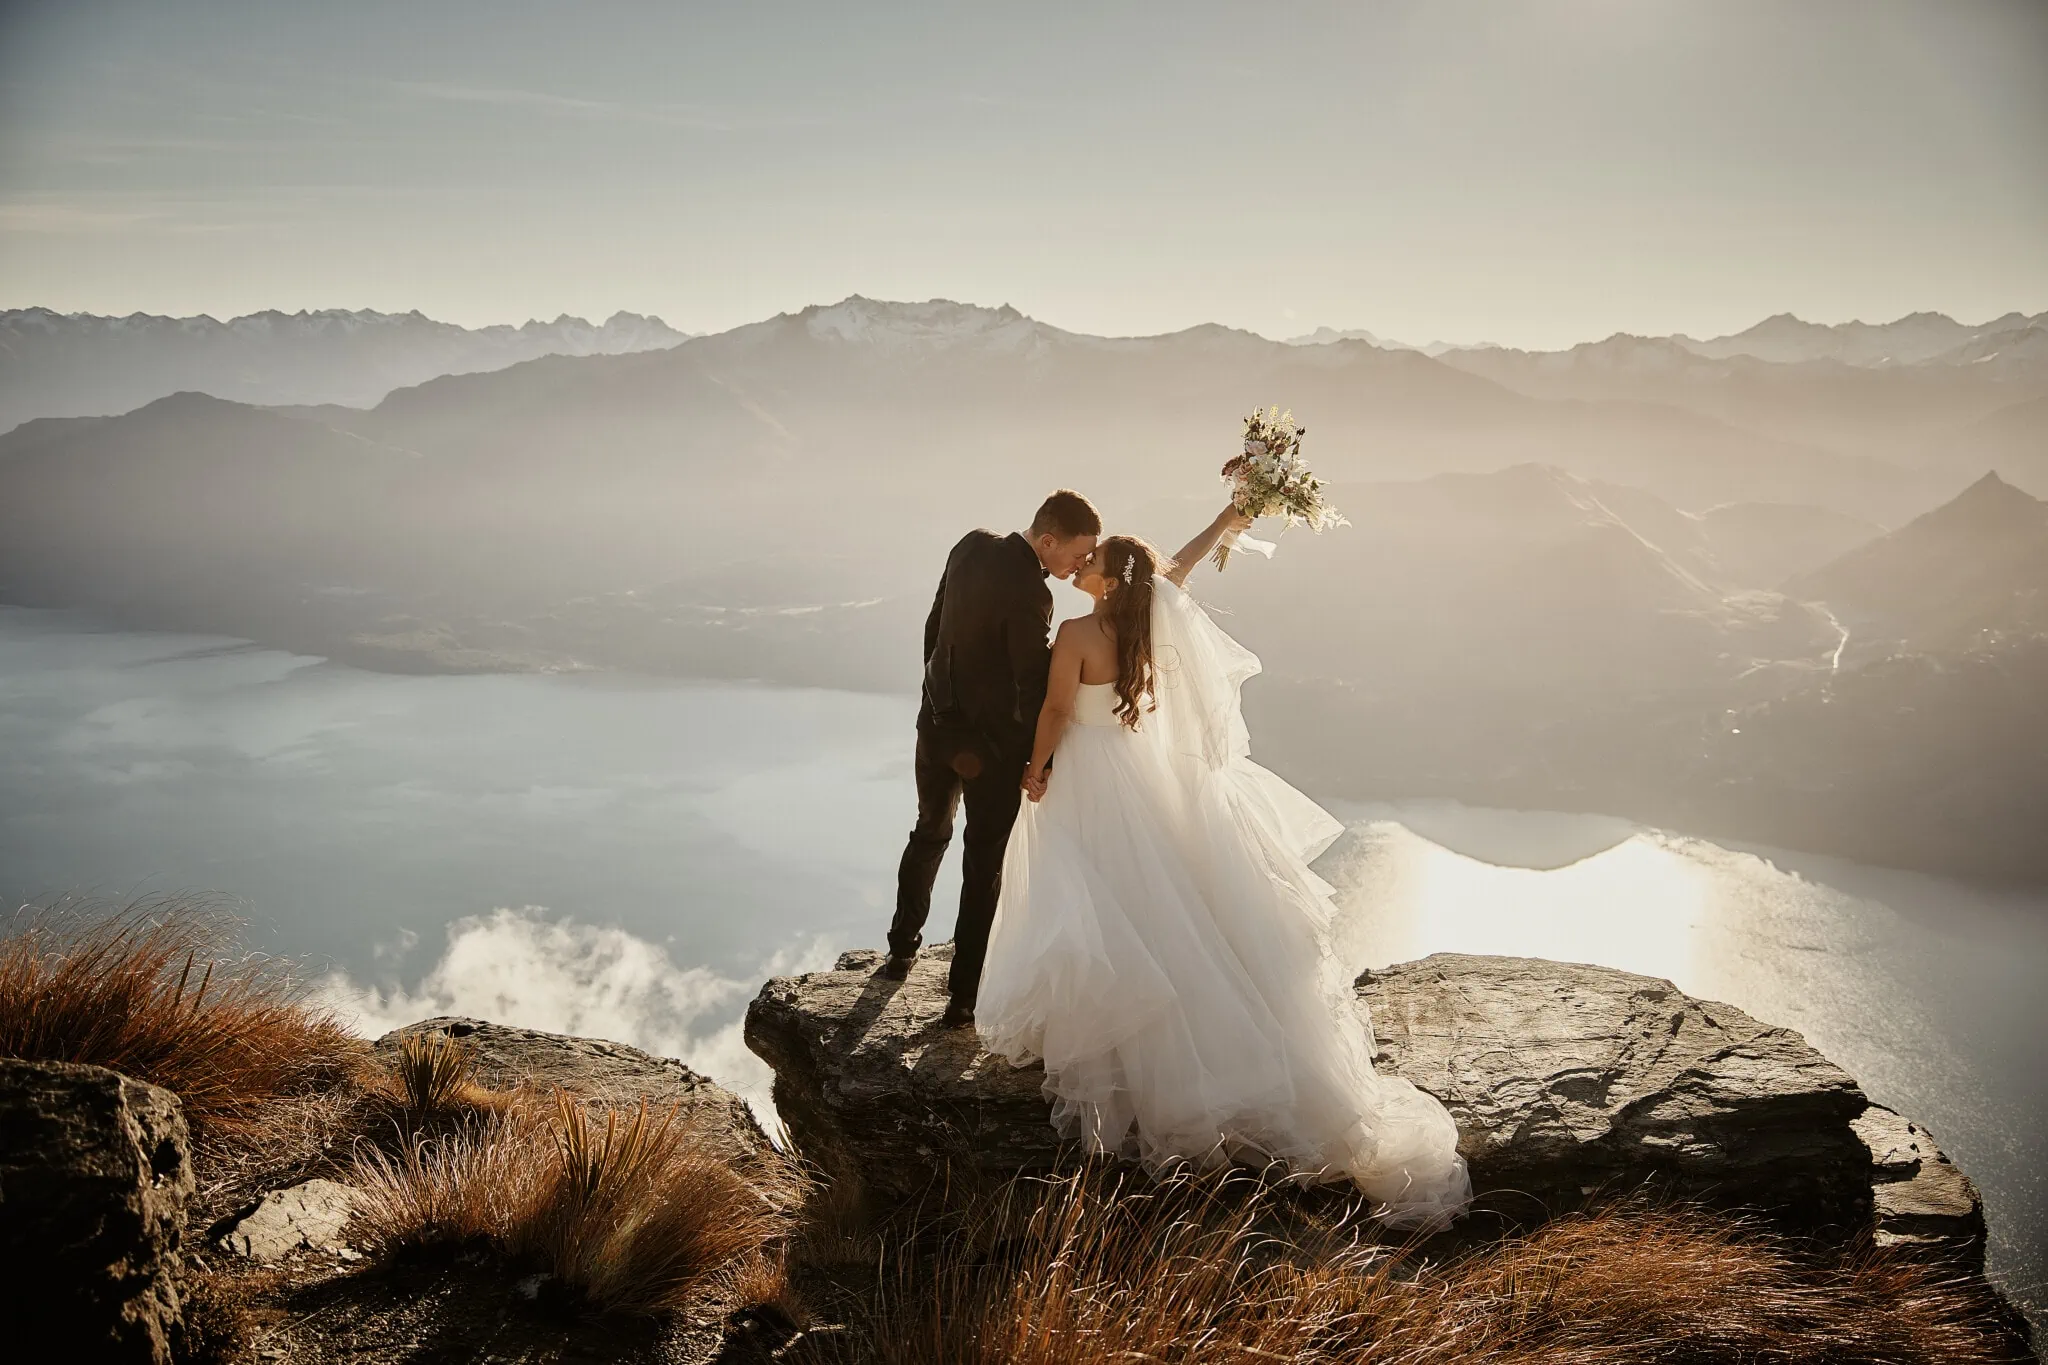 Queenstown New Zealand Elopement Wedding Photographer - Amy and Callum, a bride and groom, having a Queenstown Heli Pre Wedding Shoot on top of a cliff overlooking lake Wanaka.